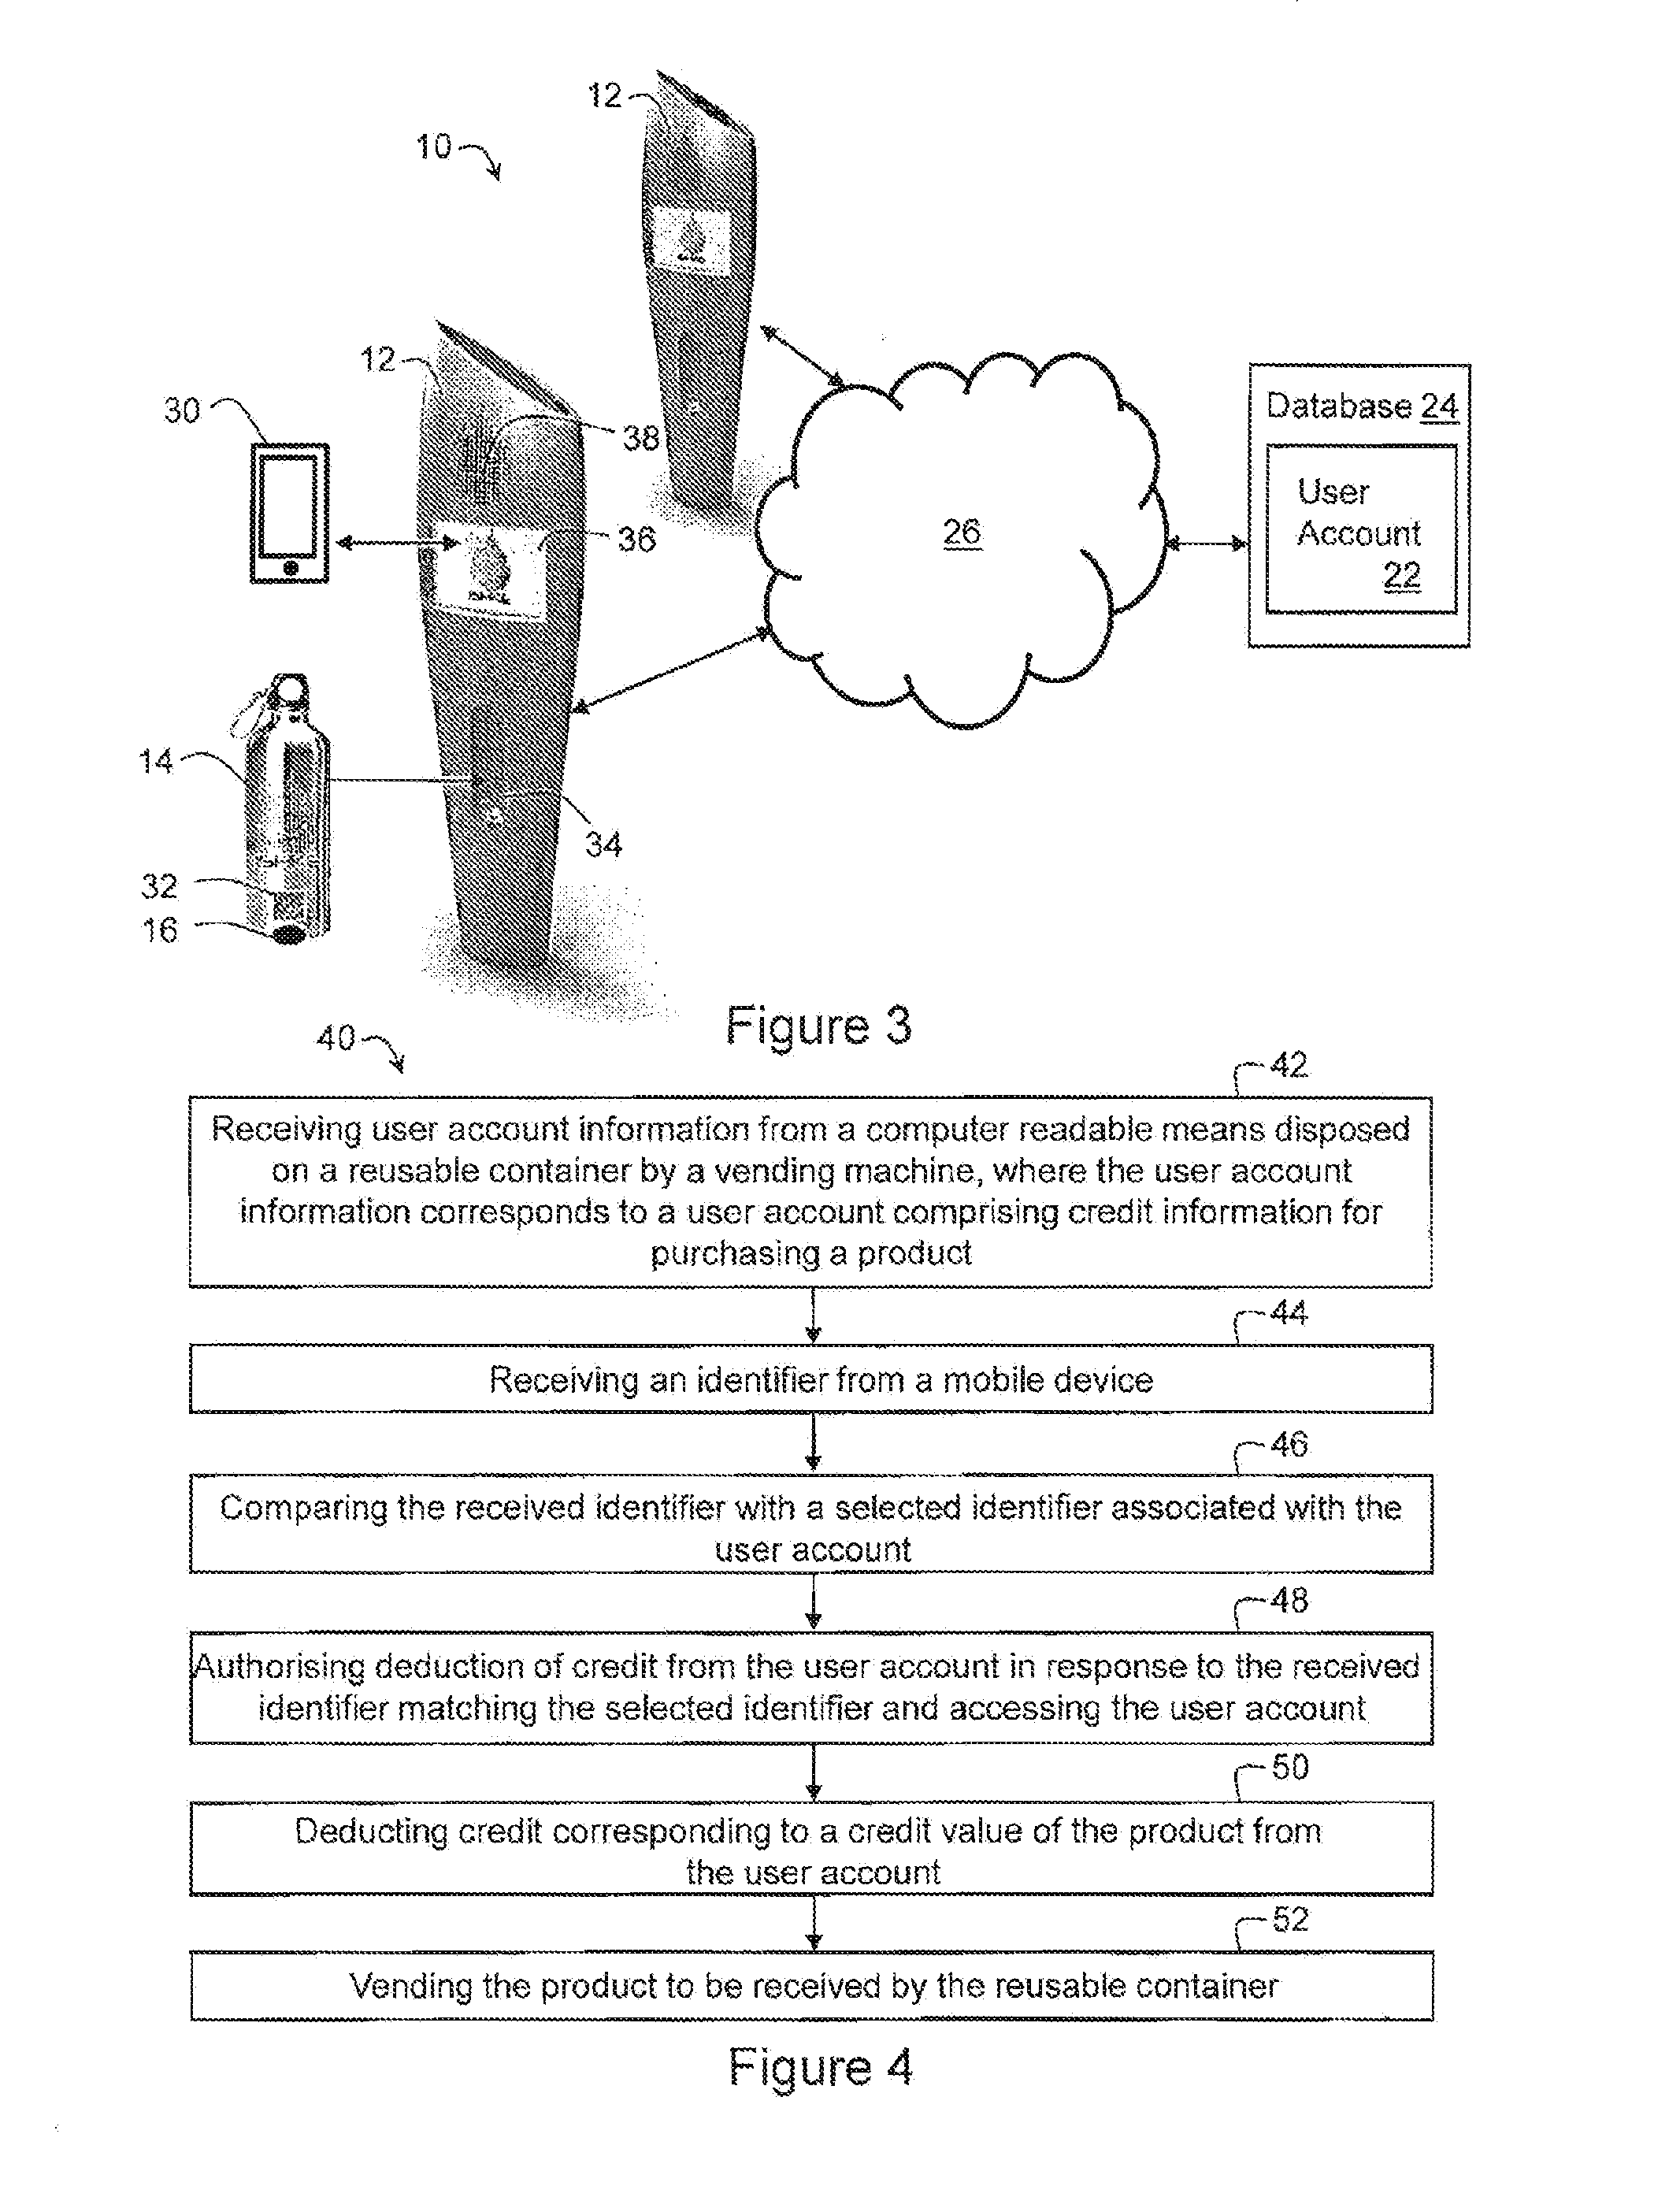 Method and system of vending a product into a reusable container